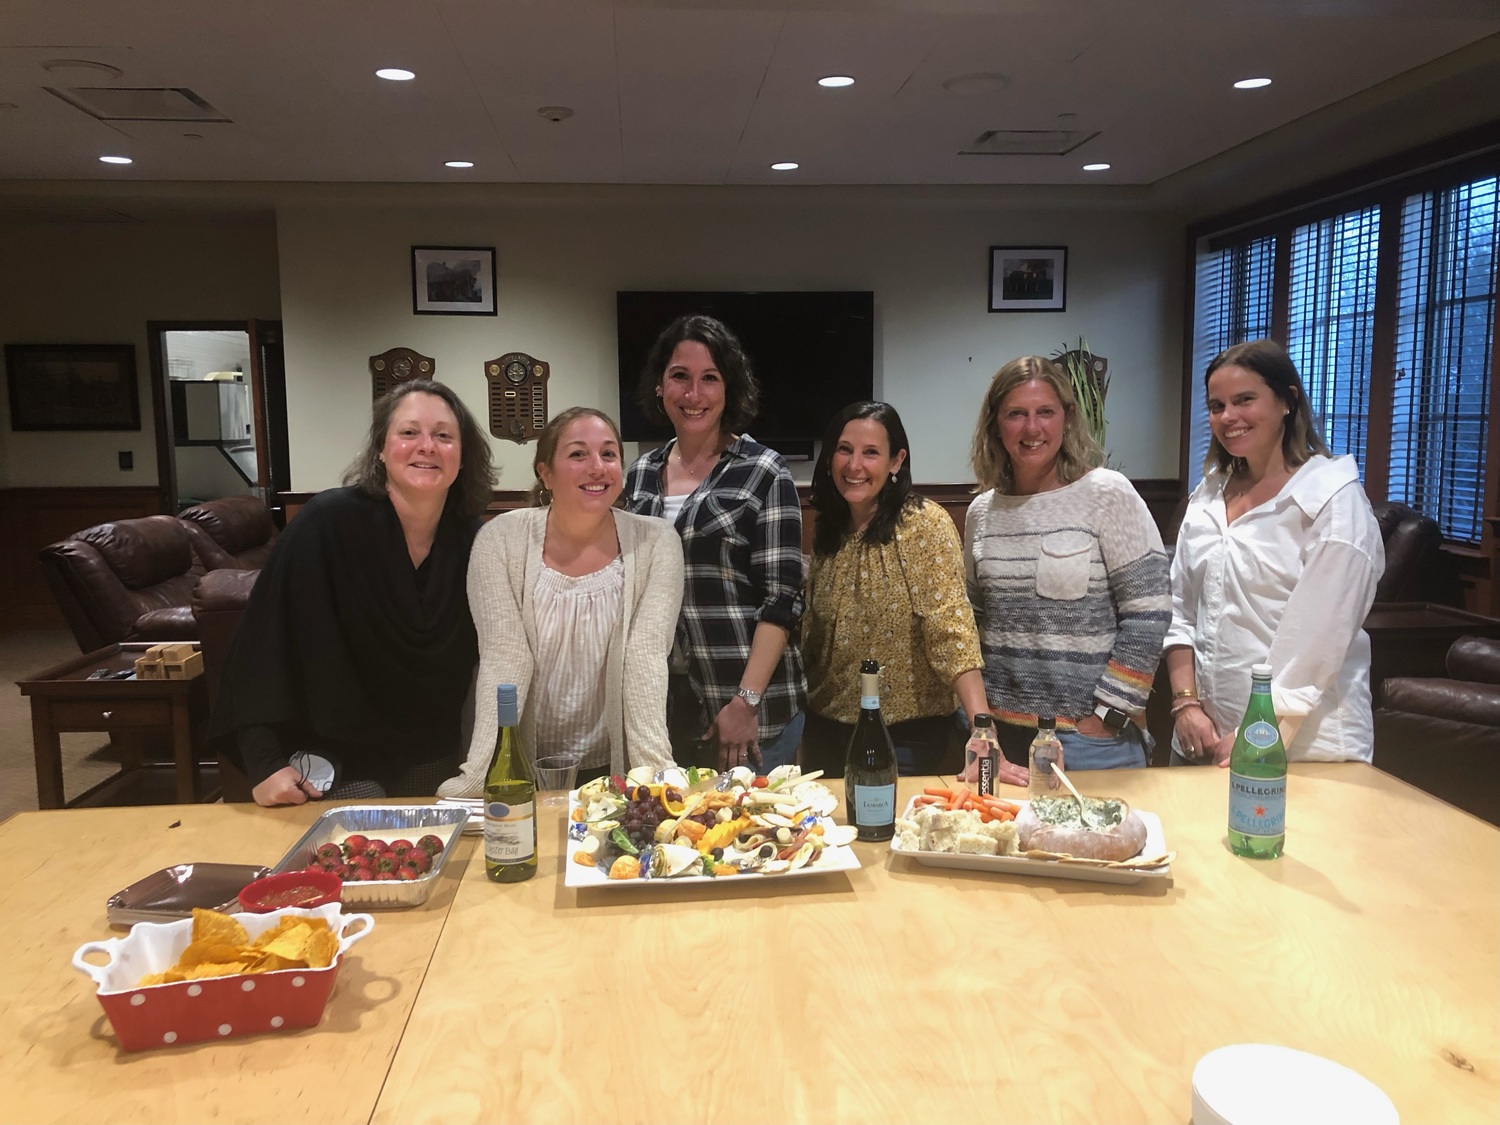 Warriors of the East End participants, from left, Trisha Poole, Catherine Benincasa, Moira Squires, Dawn Moore, Jessica Zukosky and Emily McCarthy.